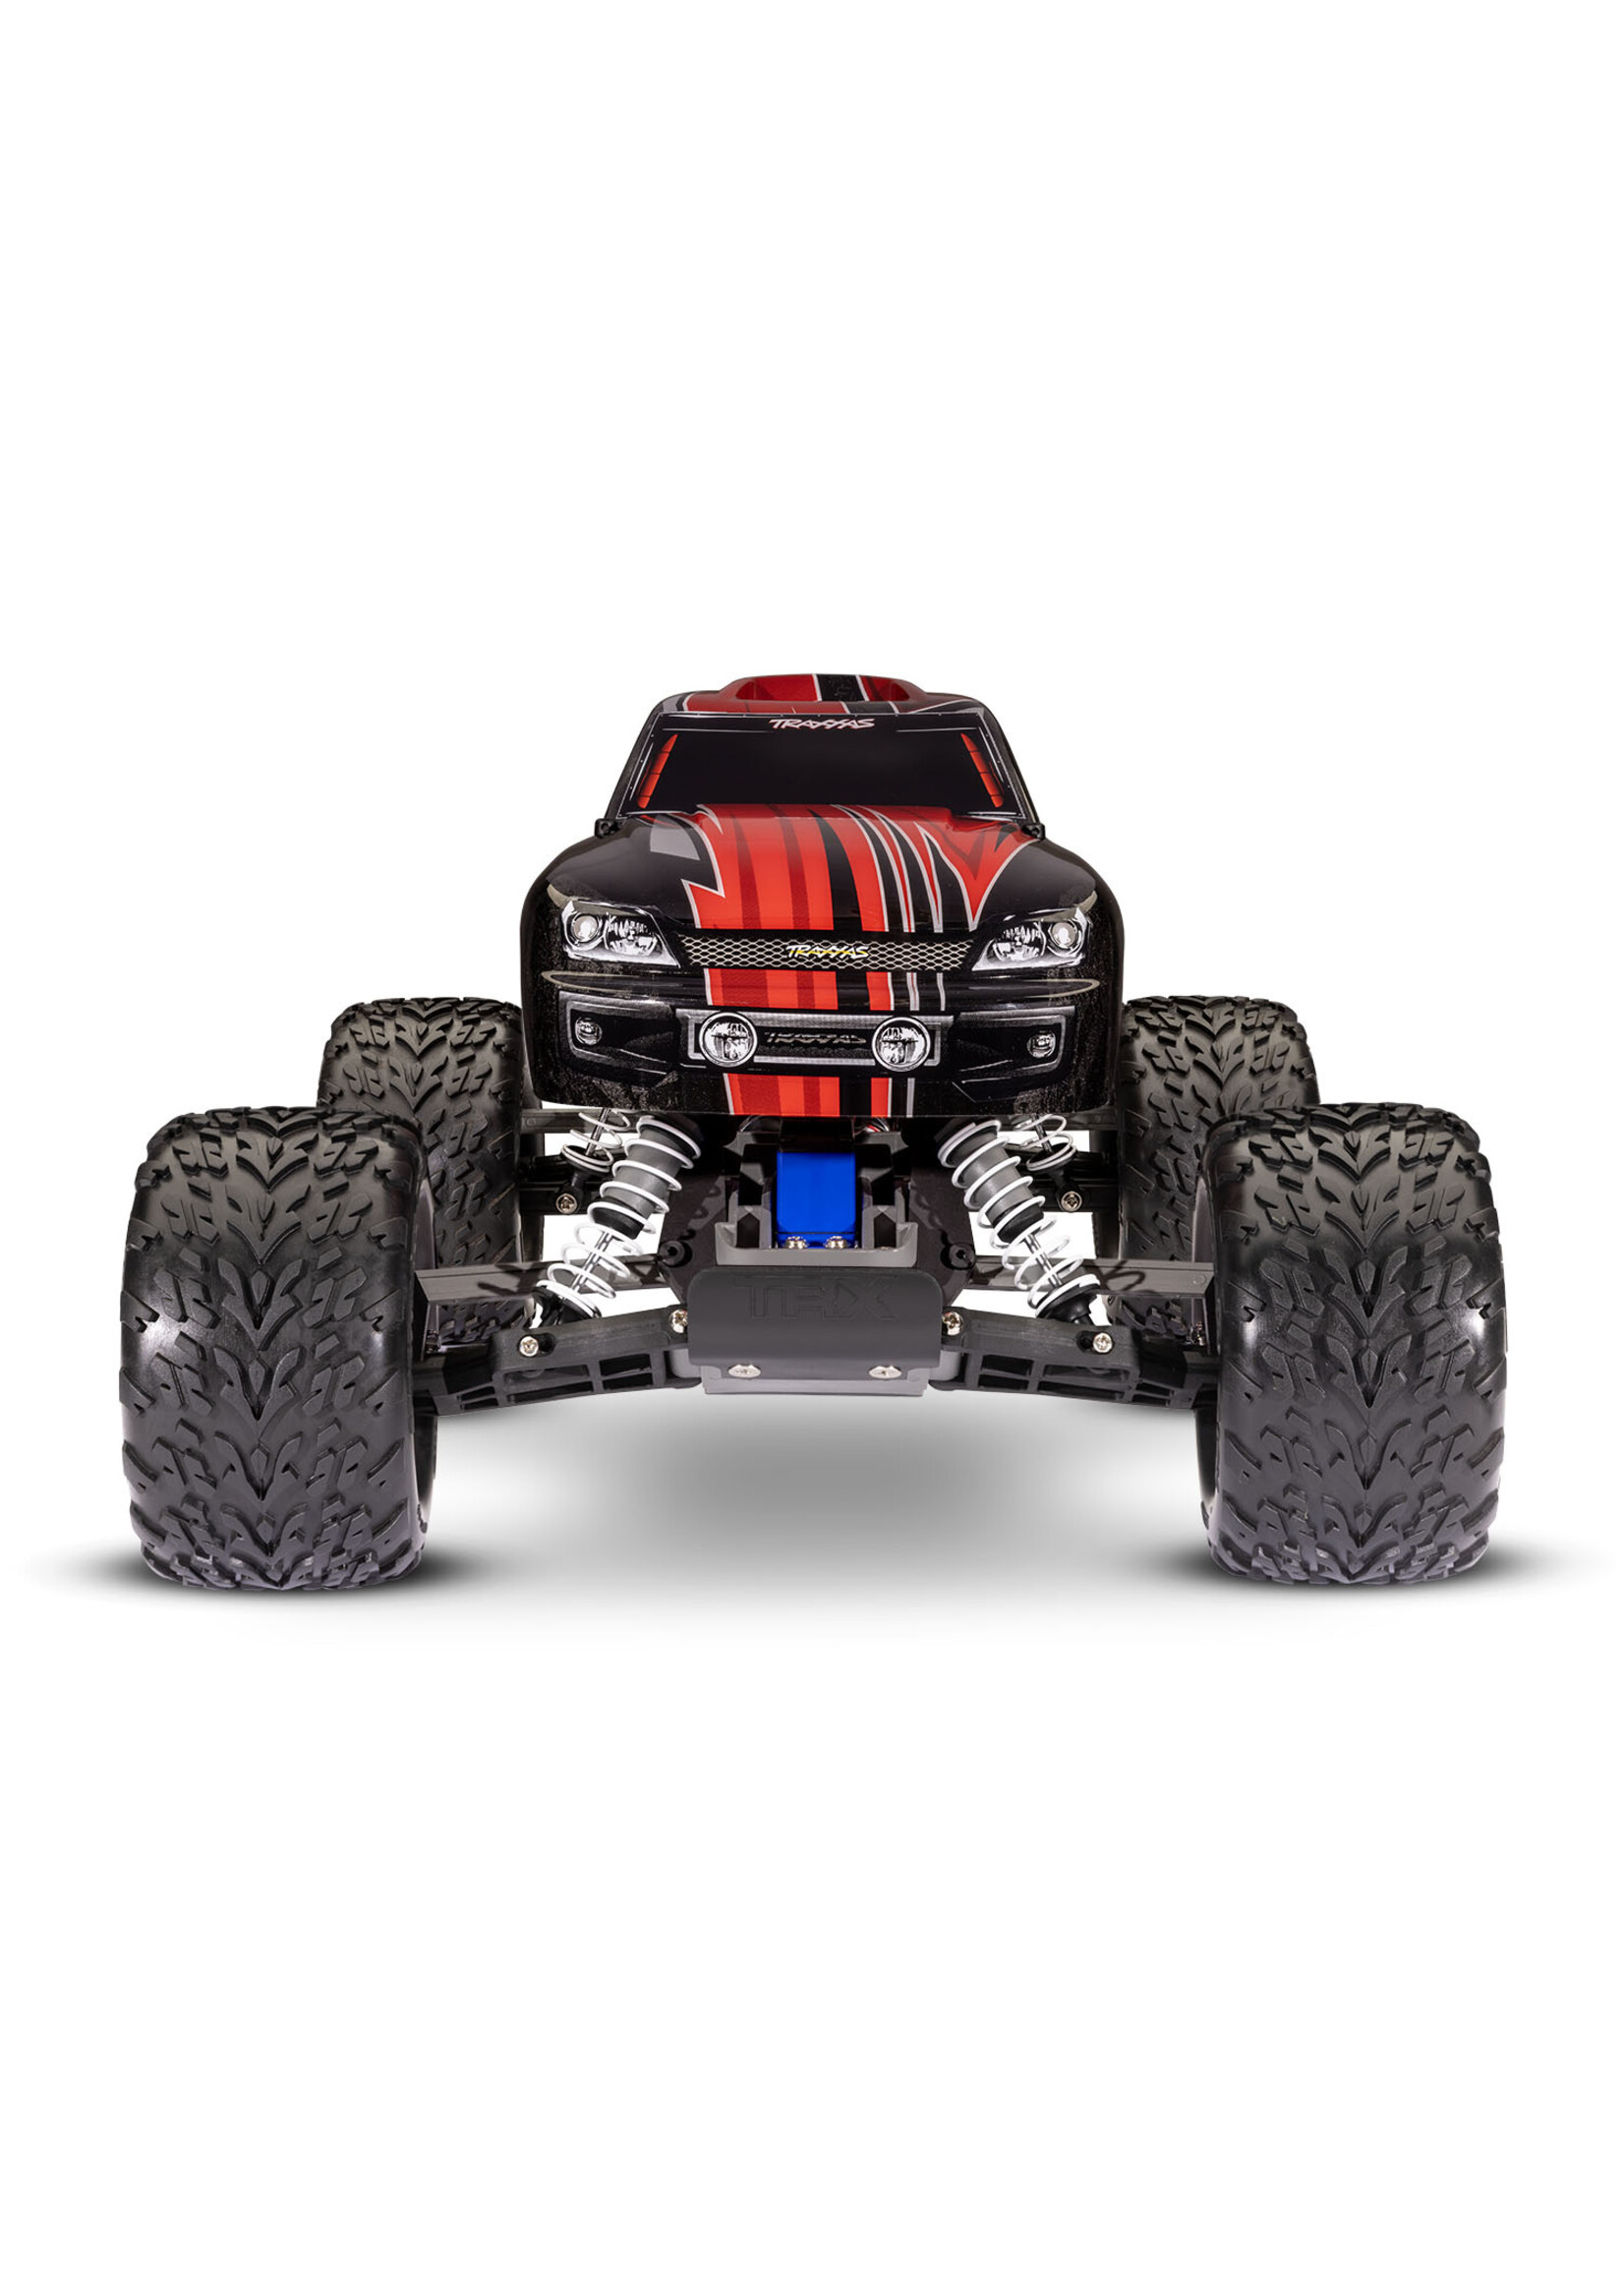 Traxxas 1/10 Stampede Monster Truck With USB-C Charger - Red